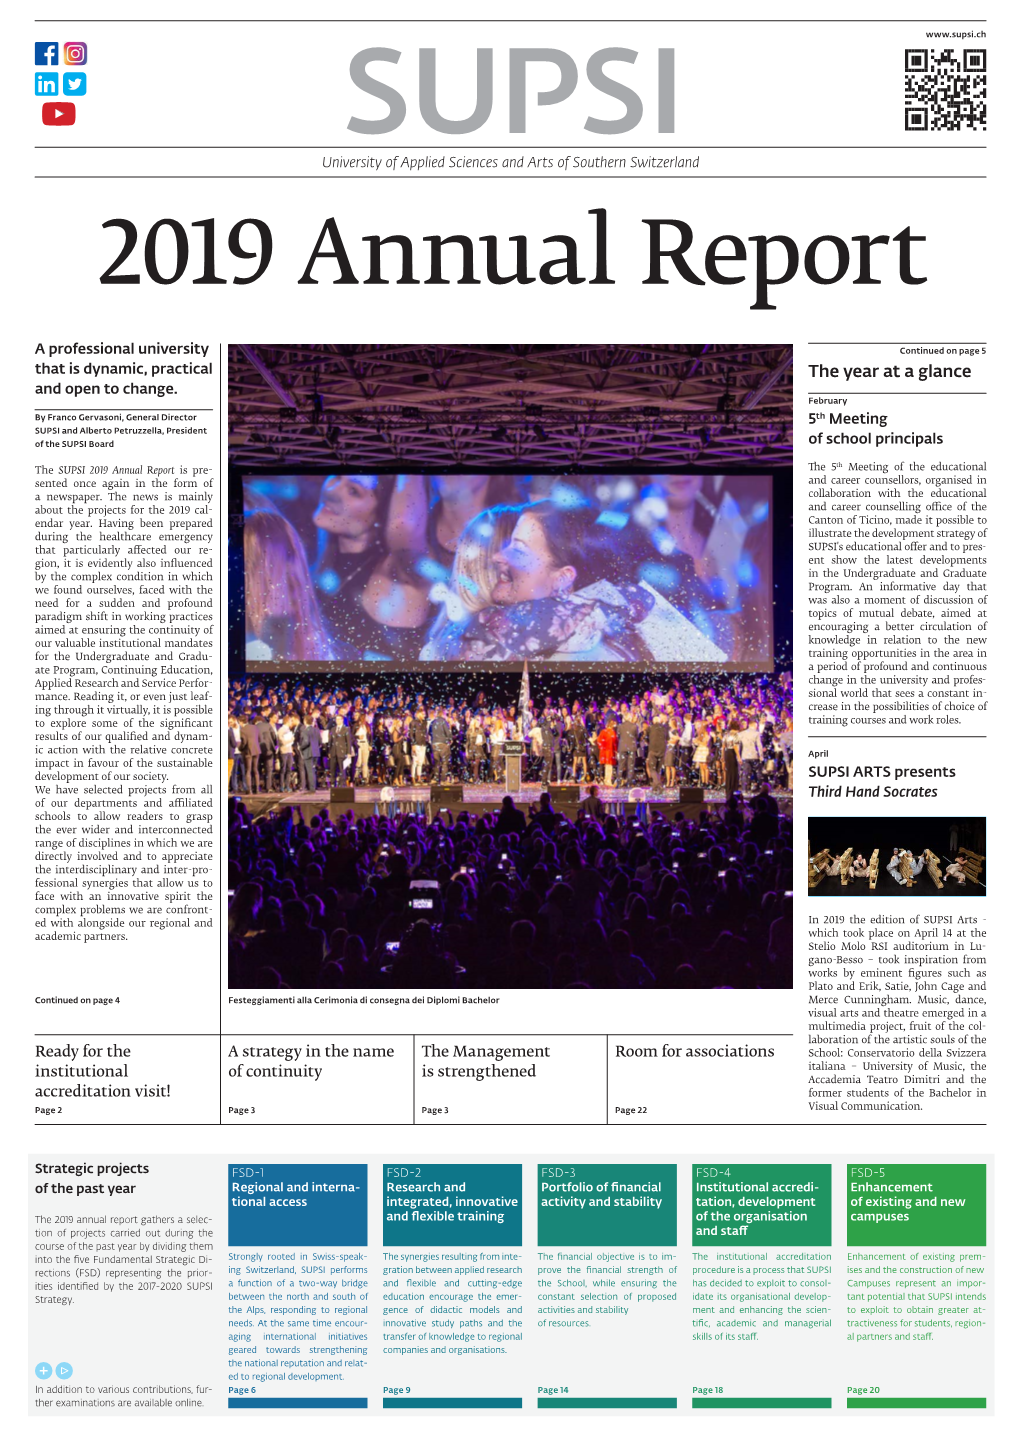 Annual Reportthe Year at a Glance and Open to Change